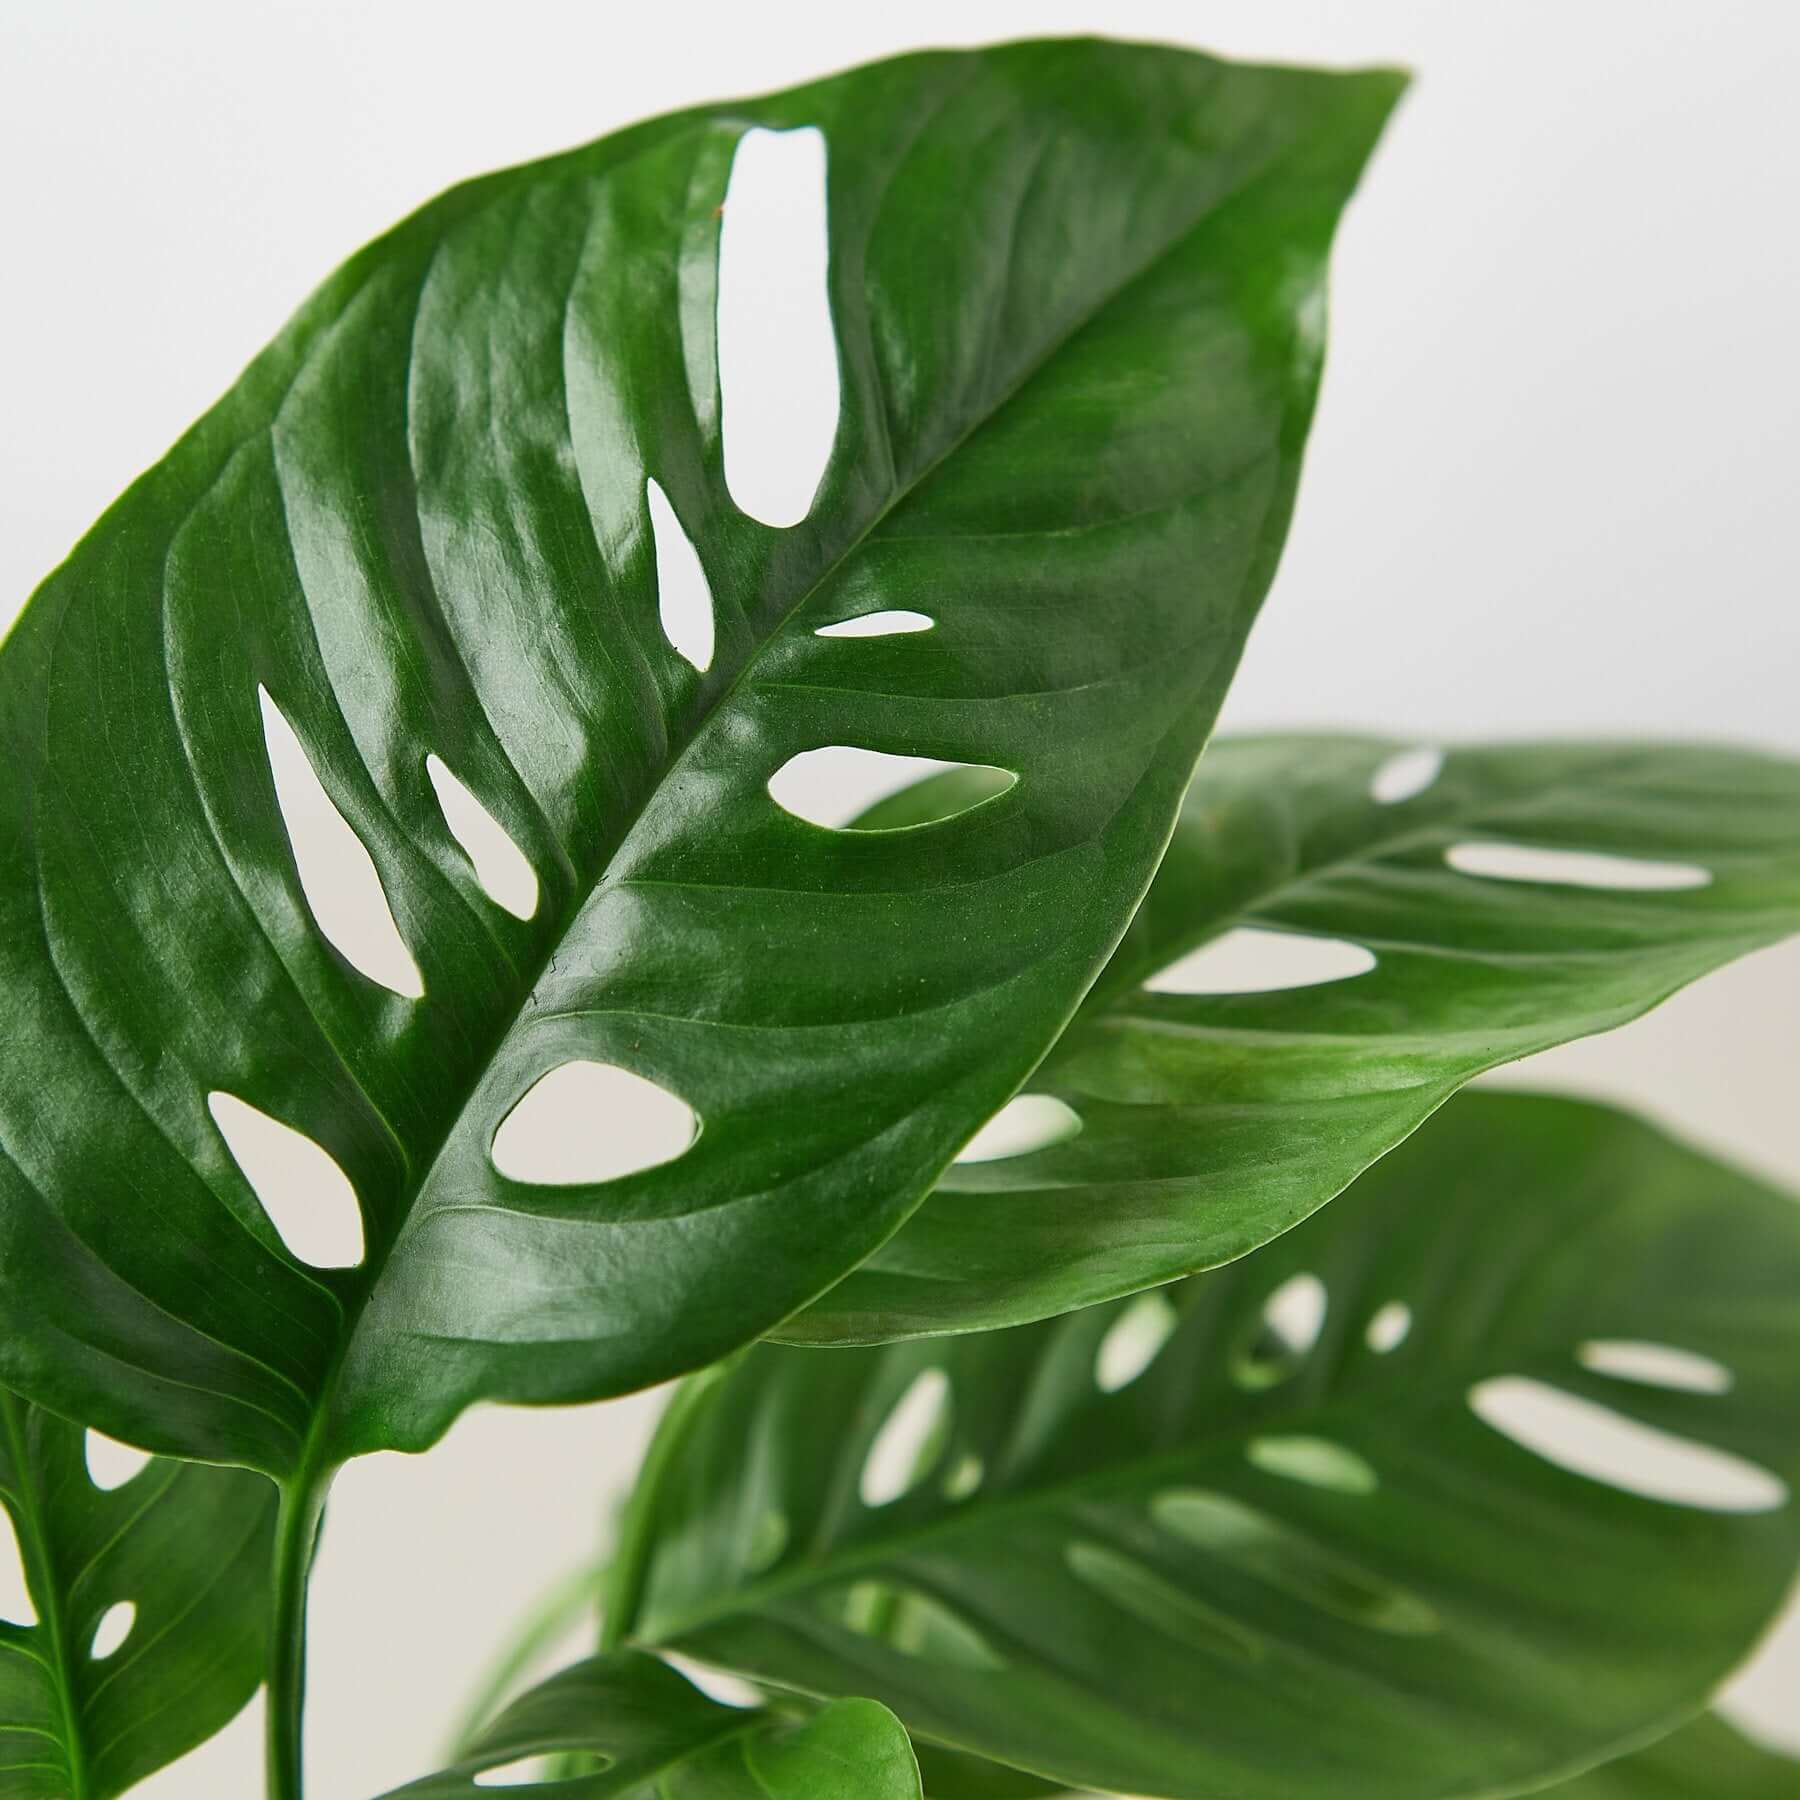 Monstera Adansonii - Swiss Cheese Plant | Modern house plants that clean the air